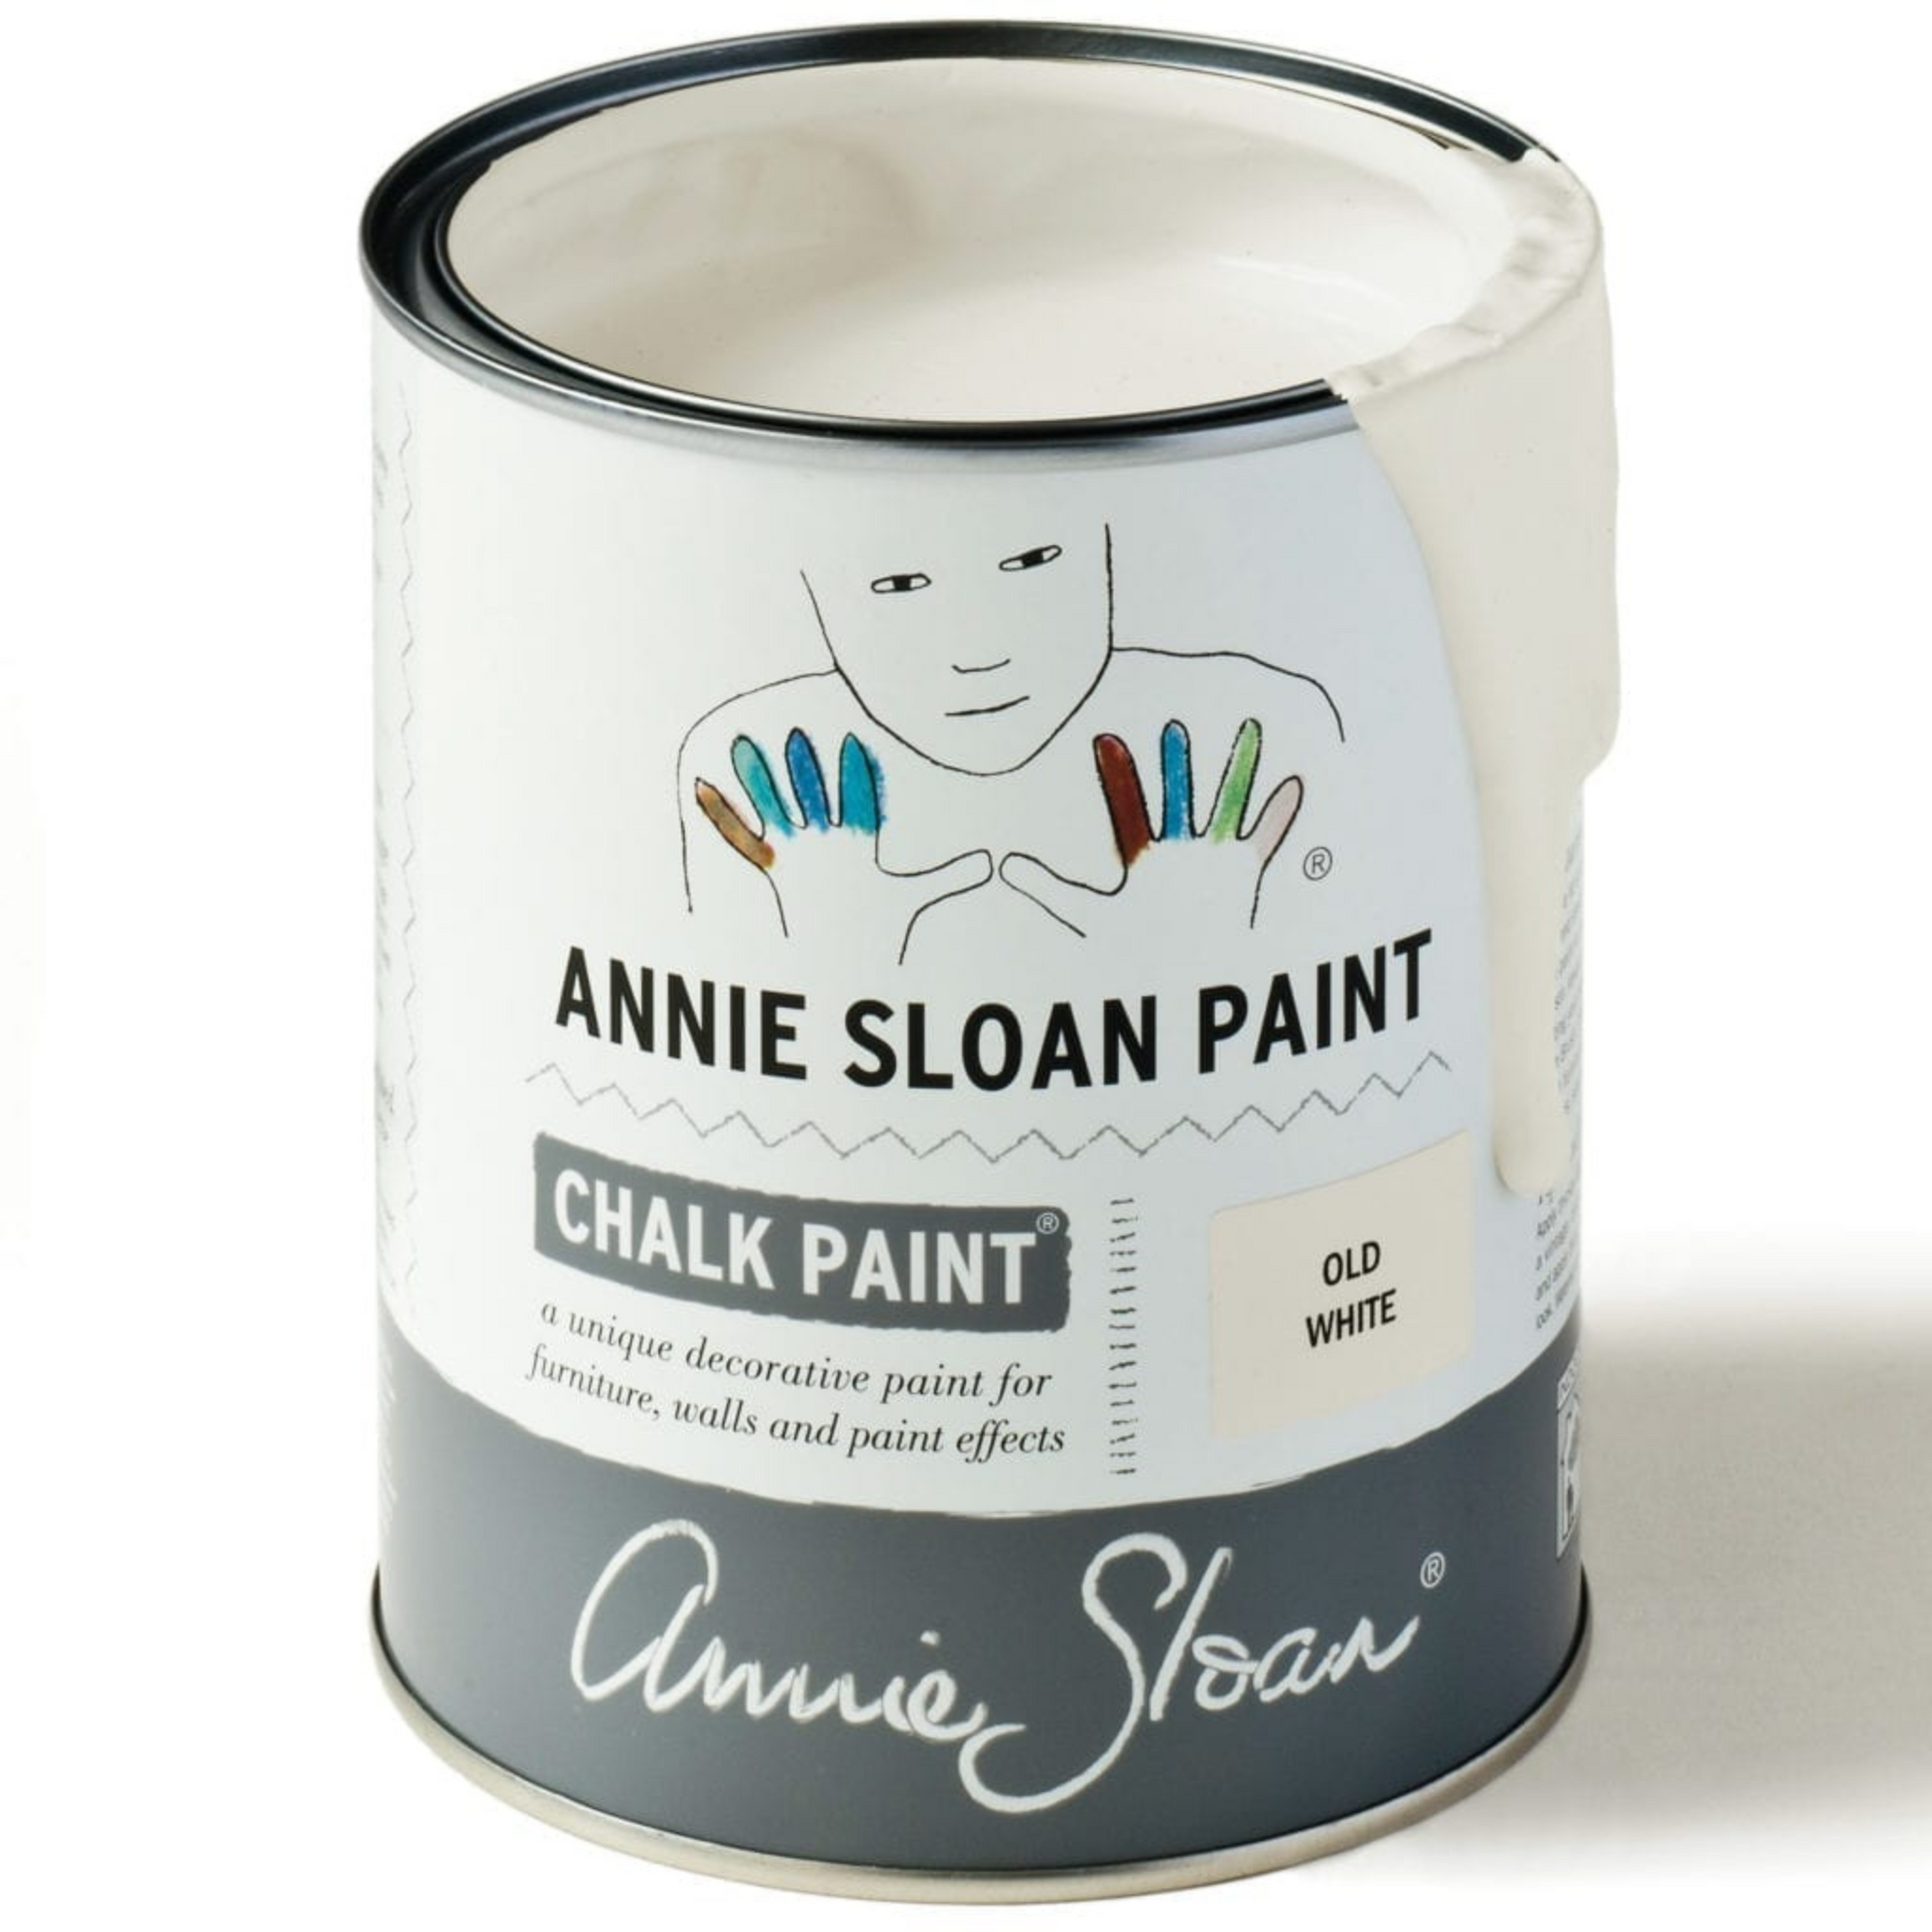 Can of Old White Annie Sloan Chalk Paint.